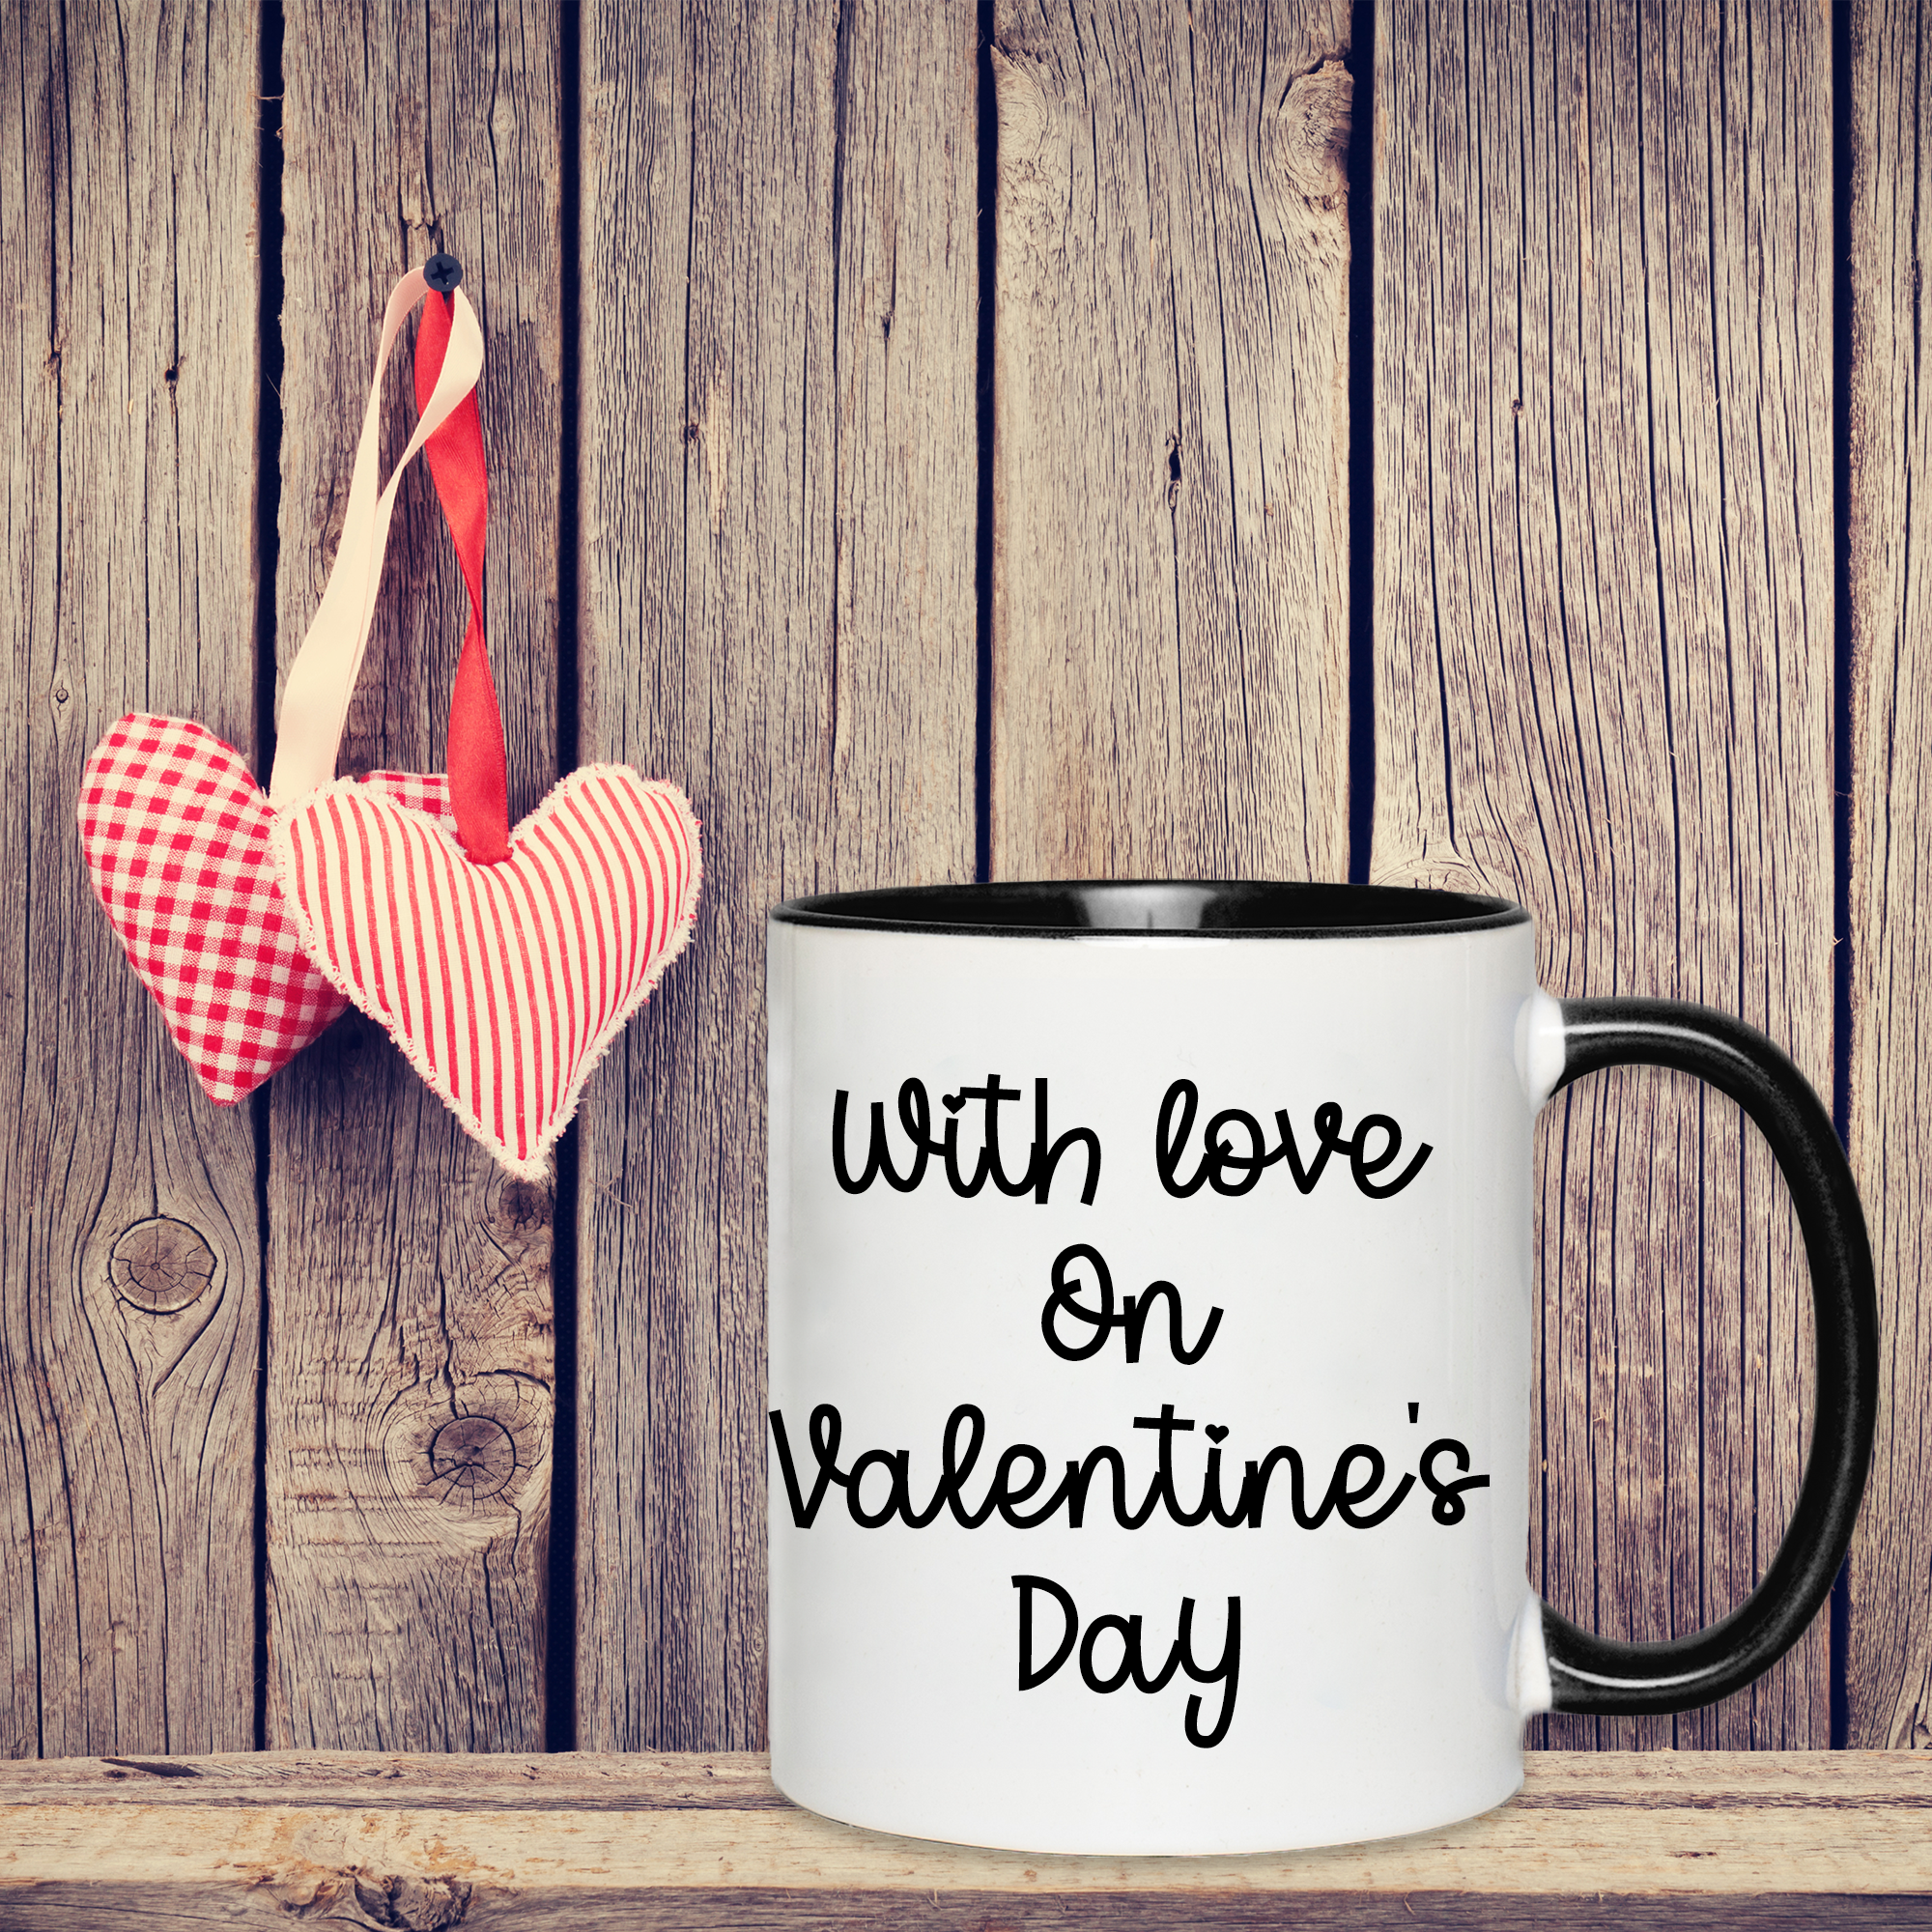 You're Purrrrrfect - Black and White Valentines Day Mug - Made to Order (Last Orders before Valentines Day: 4th February